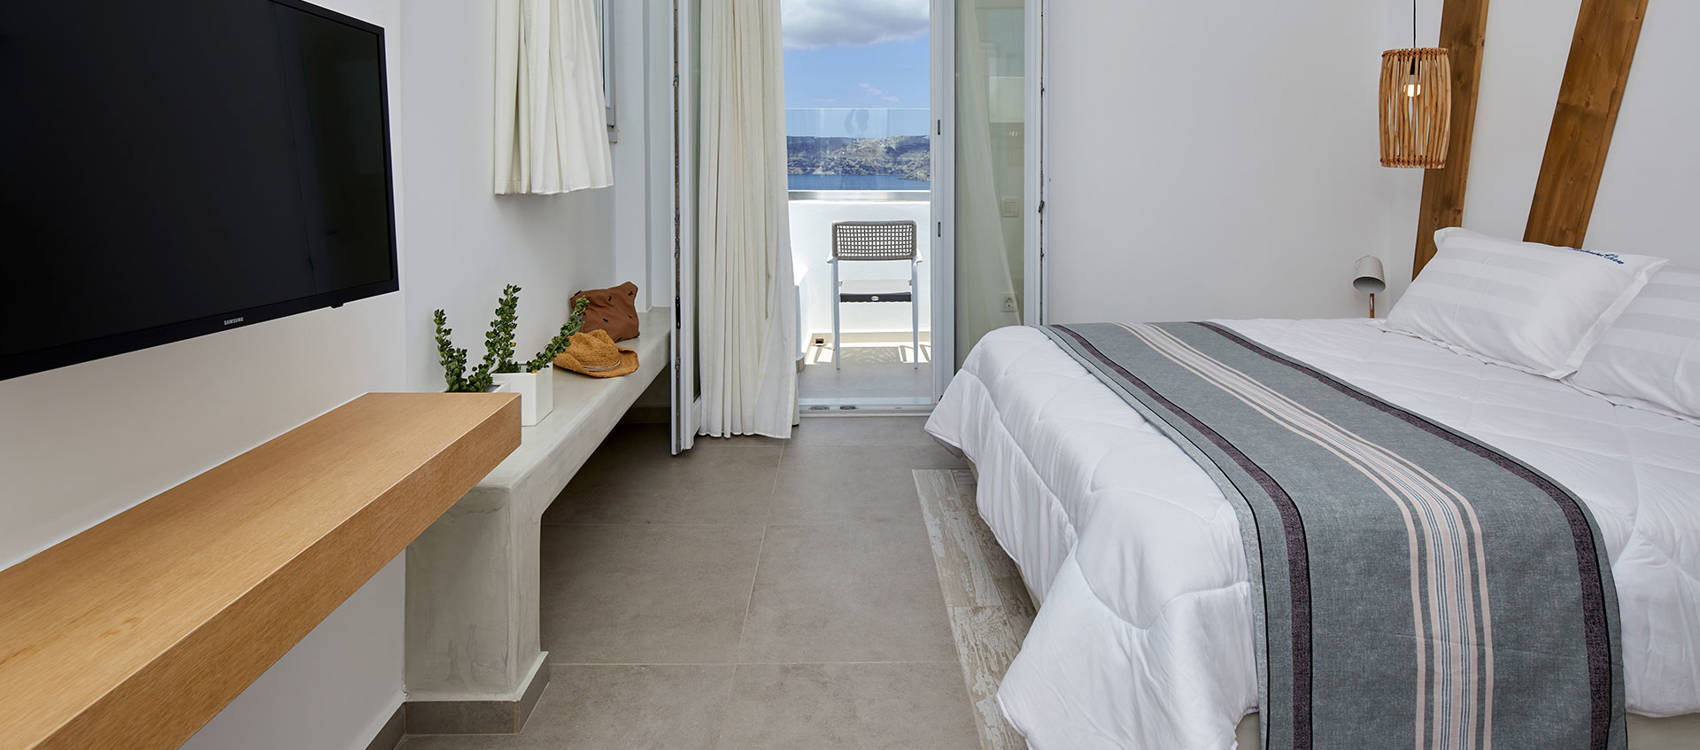  Santorini View Hotel double bed with white and grey linen, wooden decoration, white curtains and balcony with sea view